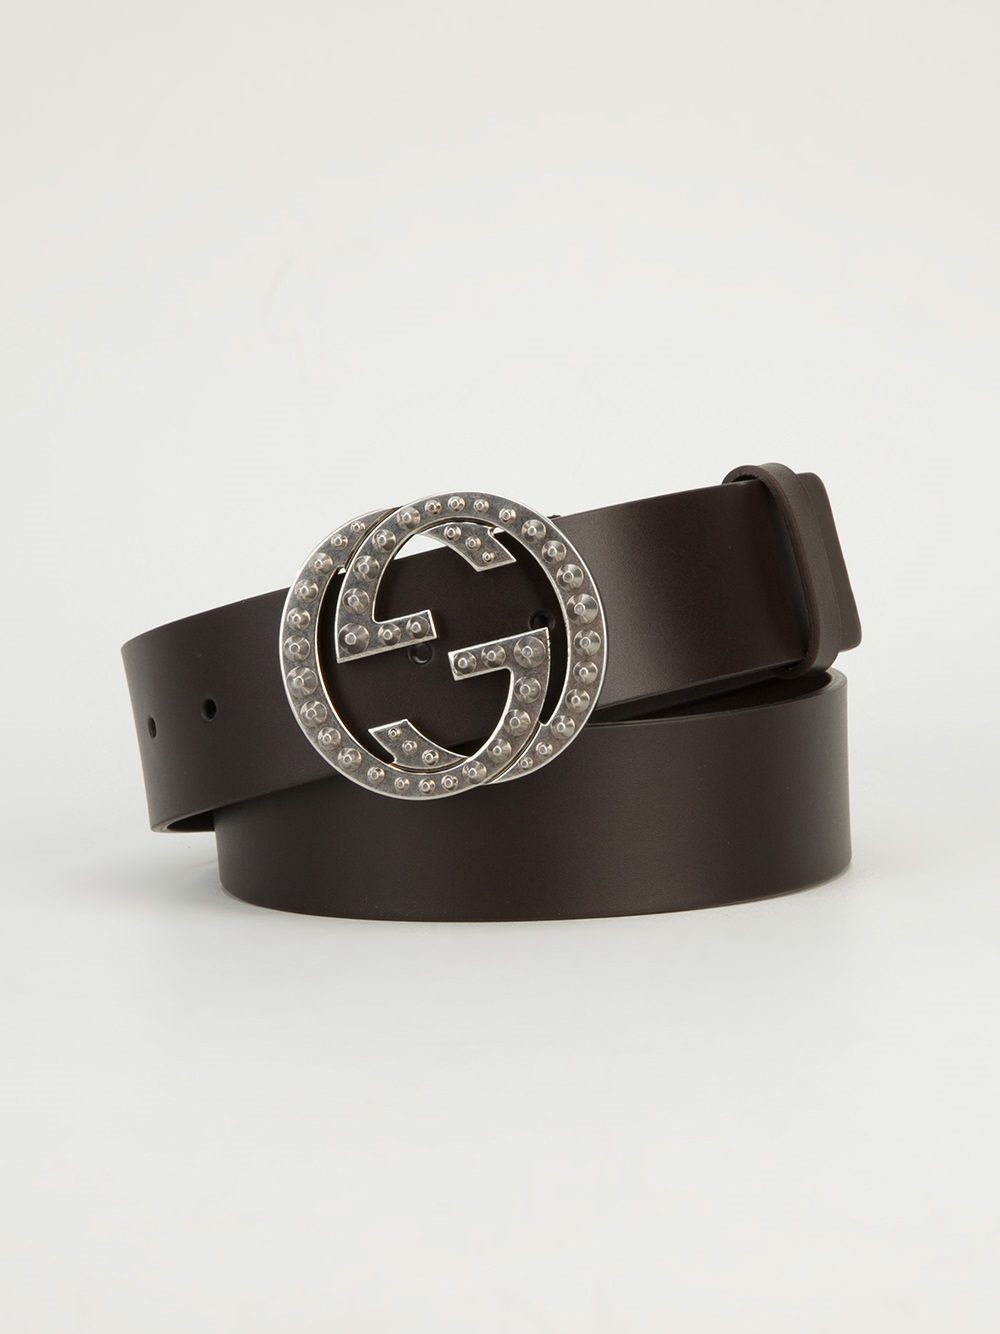 Lyst - Gucci Studded Buckle Belt in Brown for Men